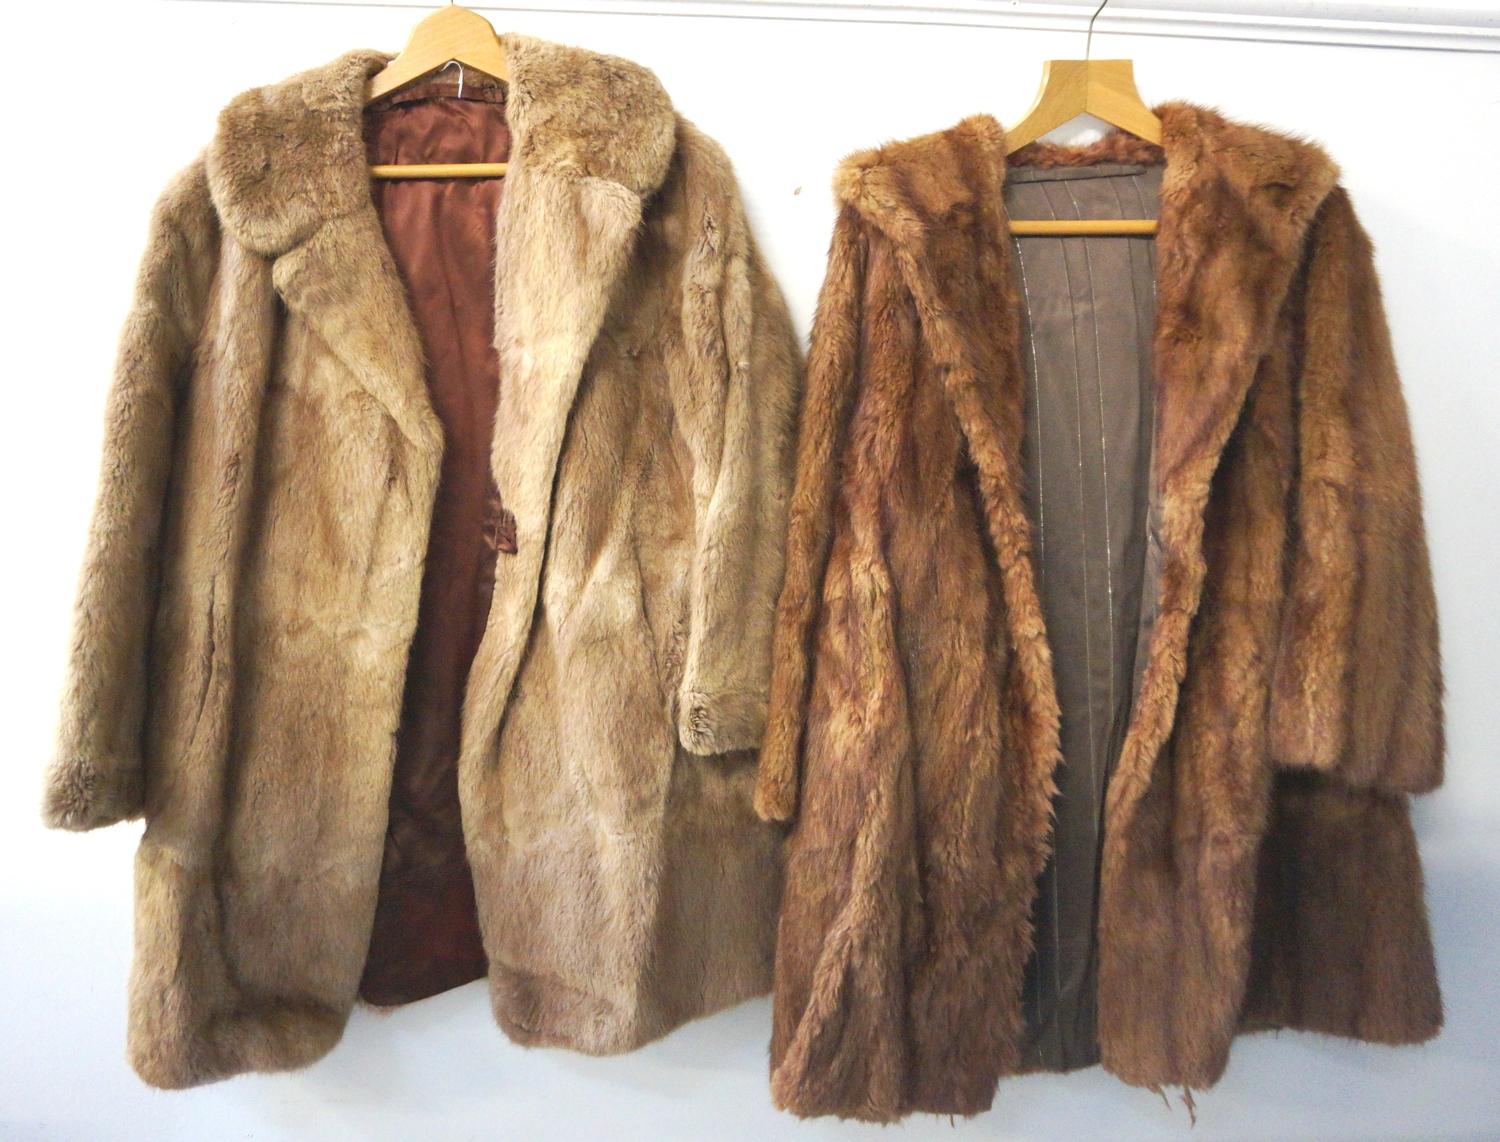 LADIES PALE BROWN MINK THREE QUARTER LENGTH JACKET with side pockets and lined interior; together